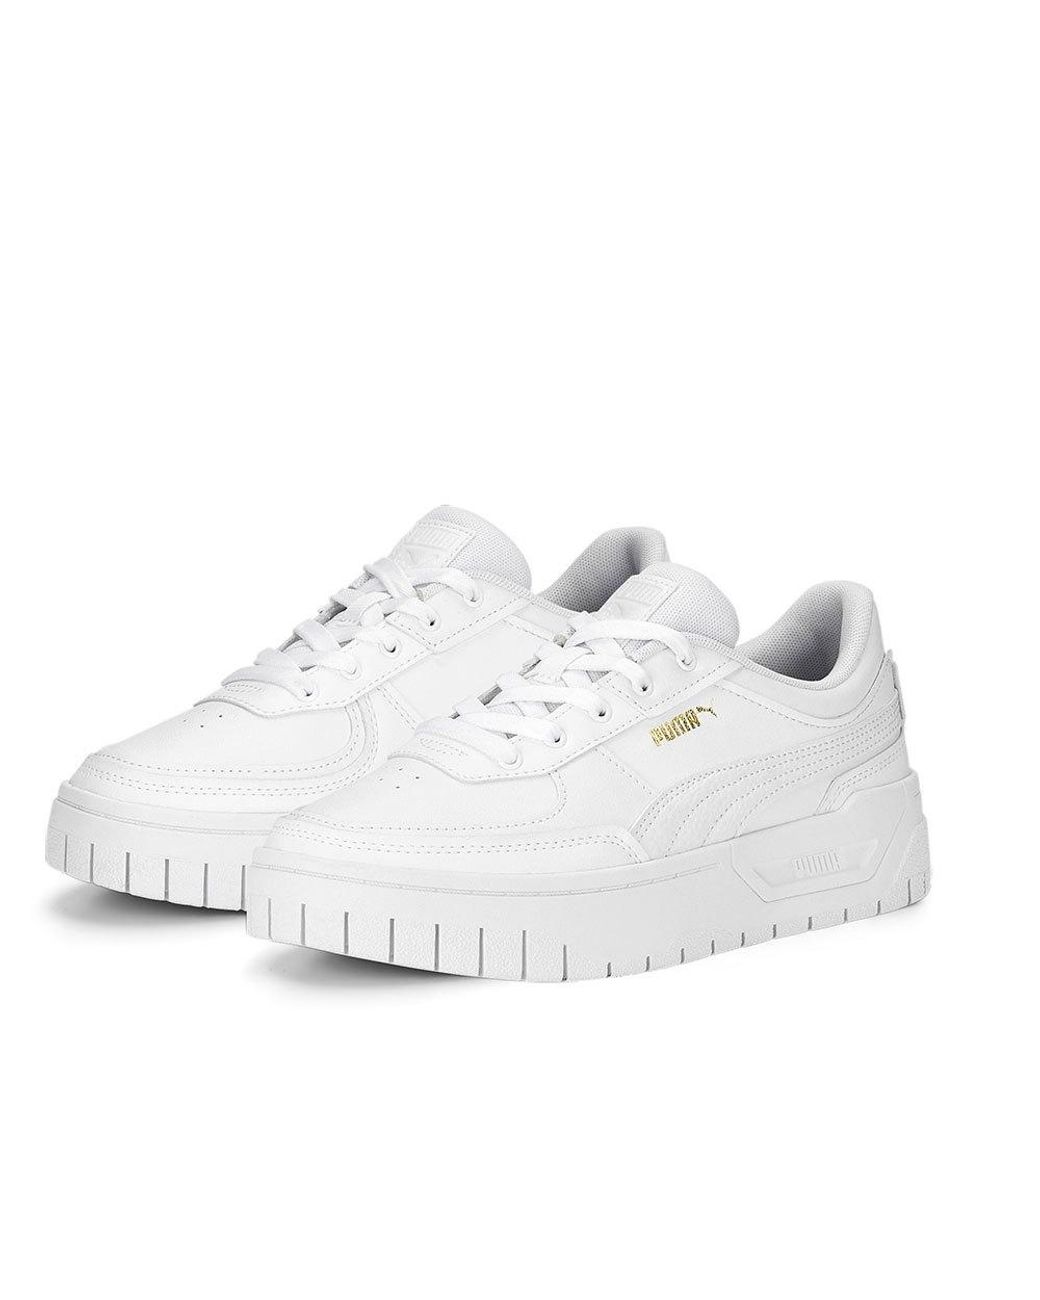 Puma Select Cali Dream Leather Trainers in White | Lyst